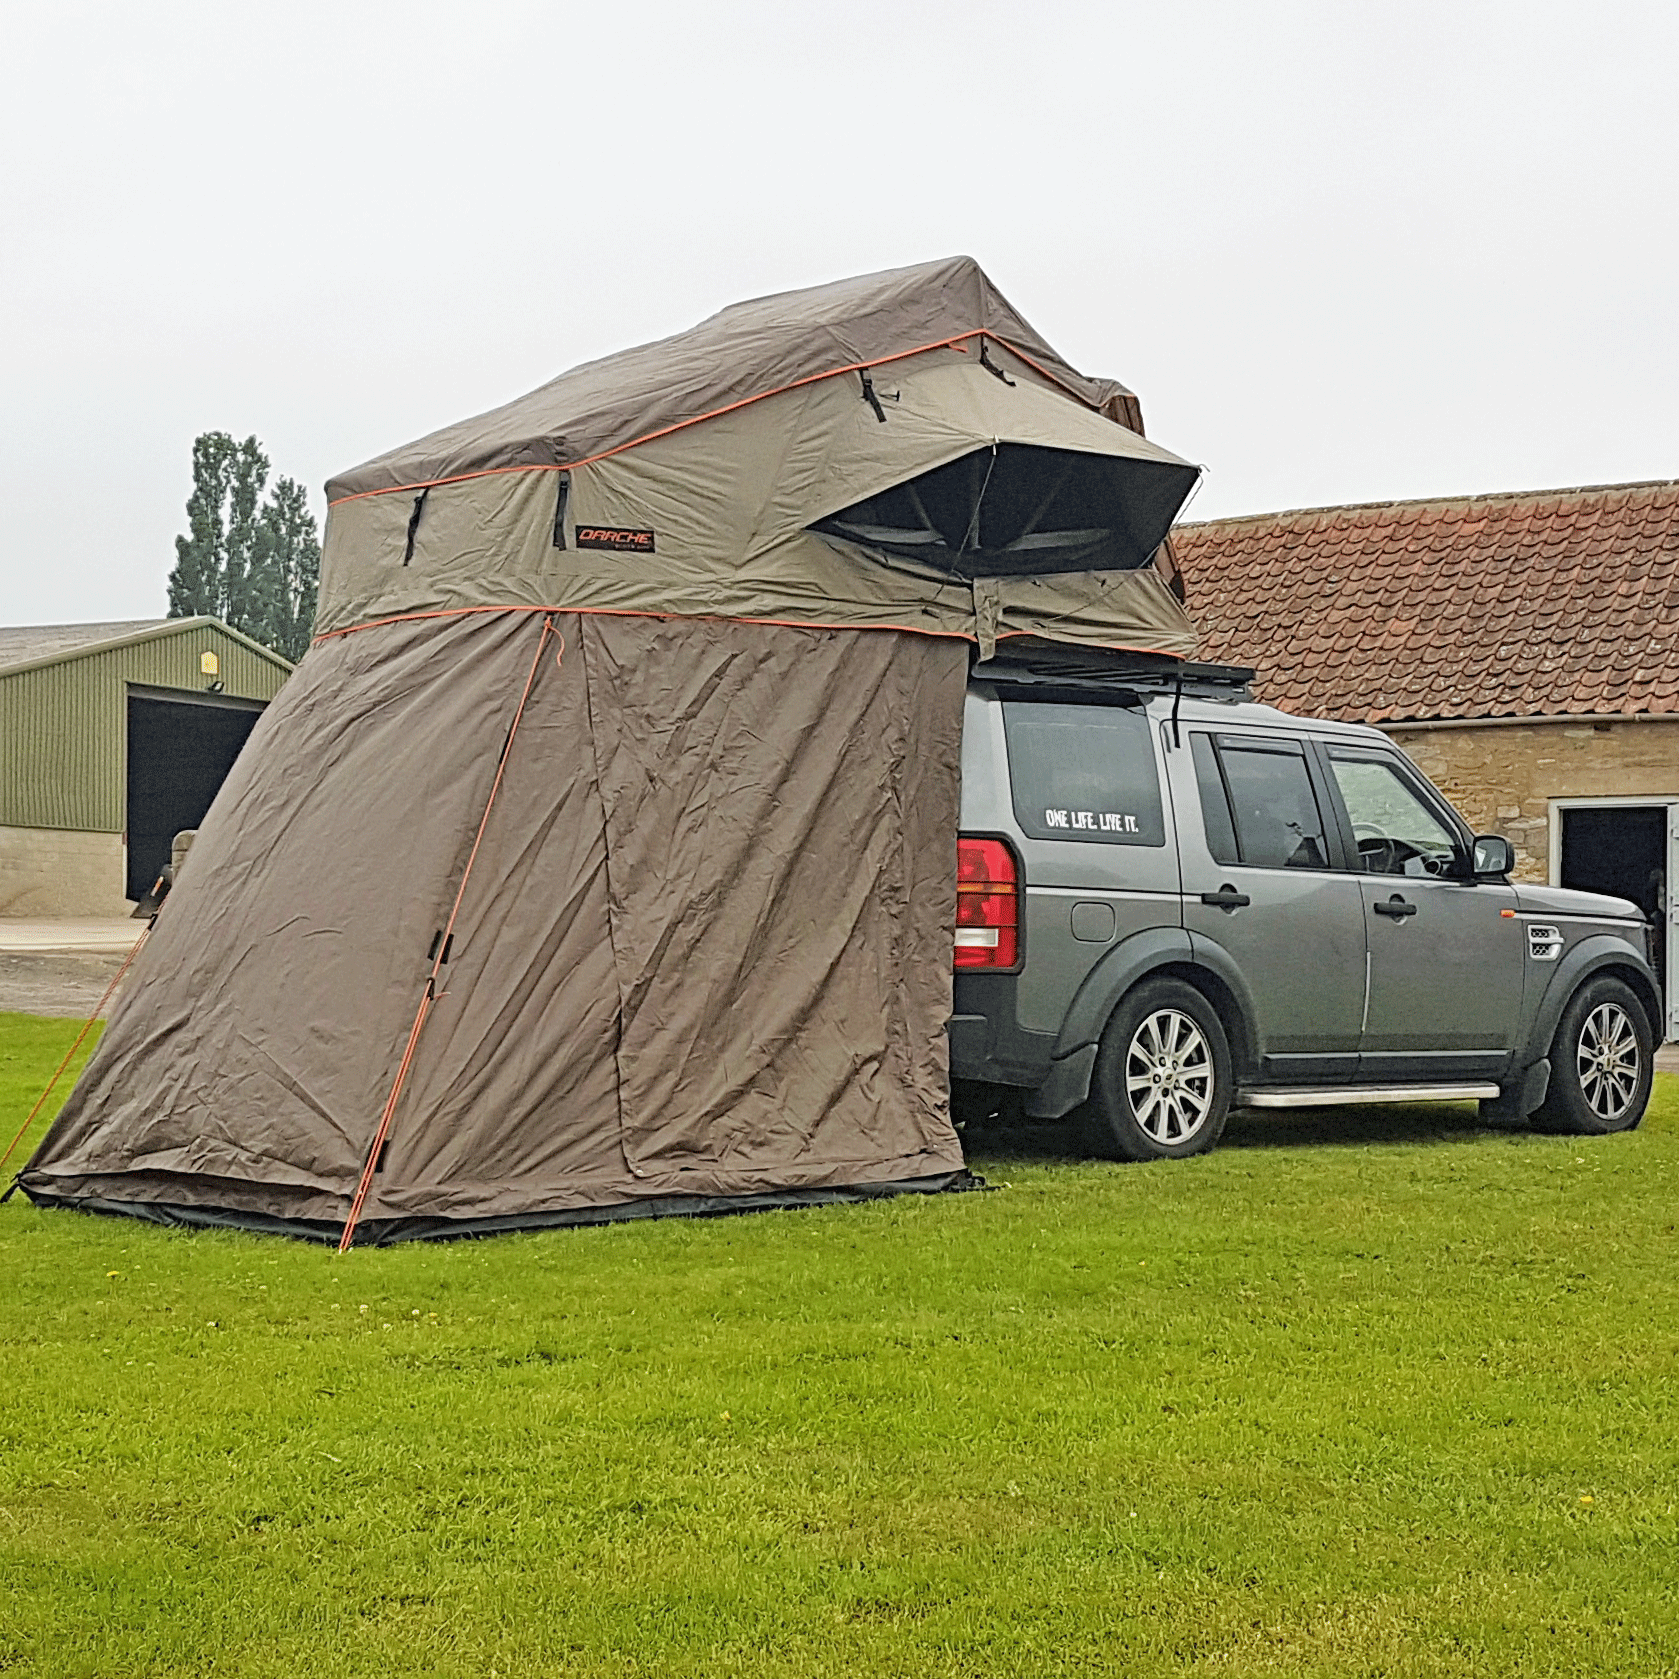 Дискавери крыша. Тент для Дискавери 4. Roof Rack Discovery 3. Land Rover Backdoor Tent. Палатка для Discovery 4.